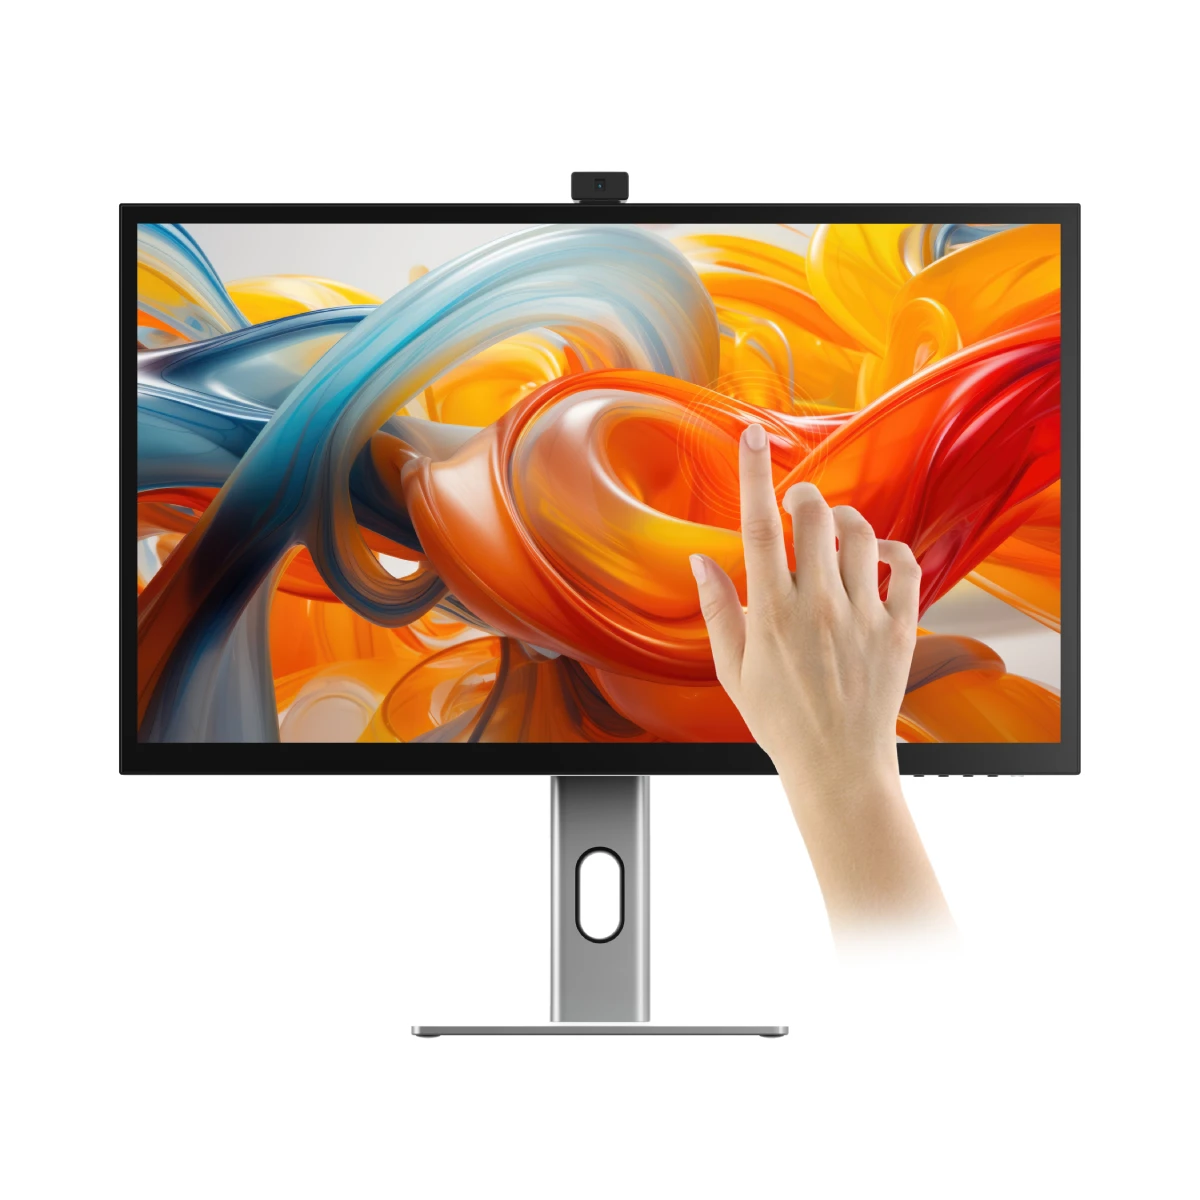 clarity-pro-touch-27-uhd-4k-monitor-with-65w-pd-webcam-and-touchscreen-pack-of-2-dual-4k-universal-docking-station-displayport-edition_2